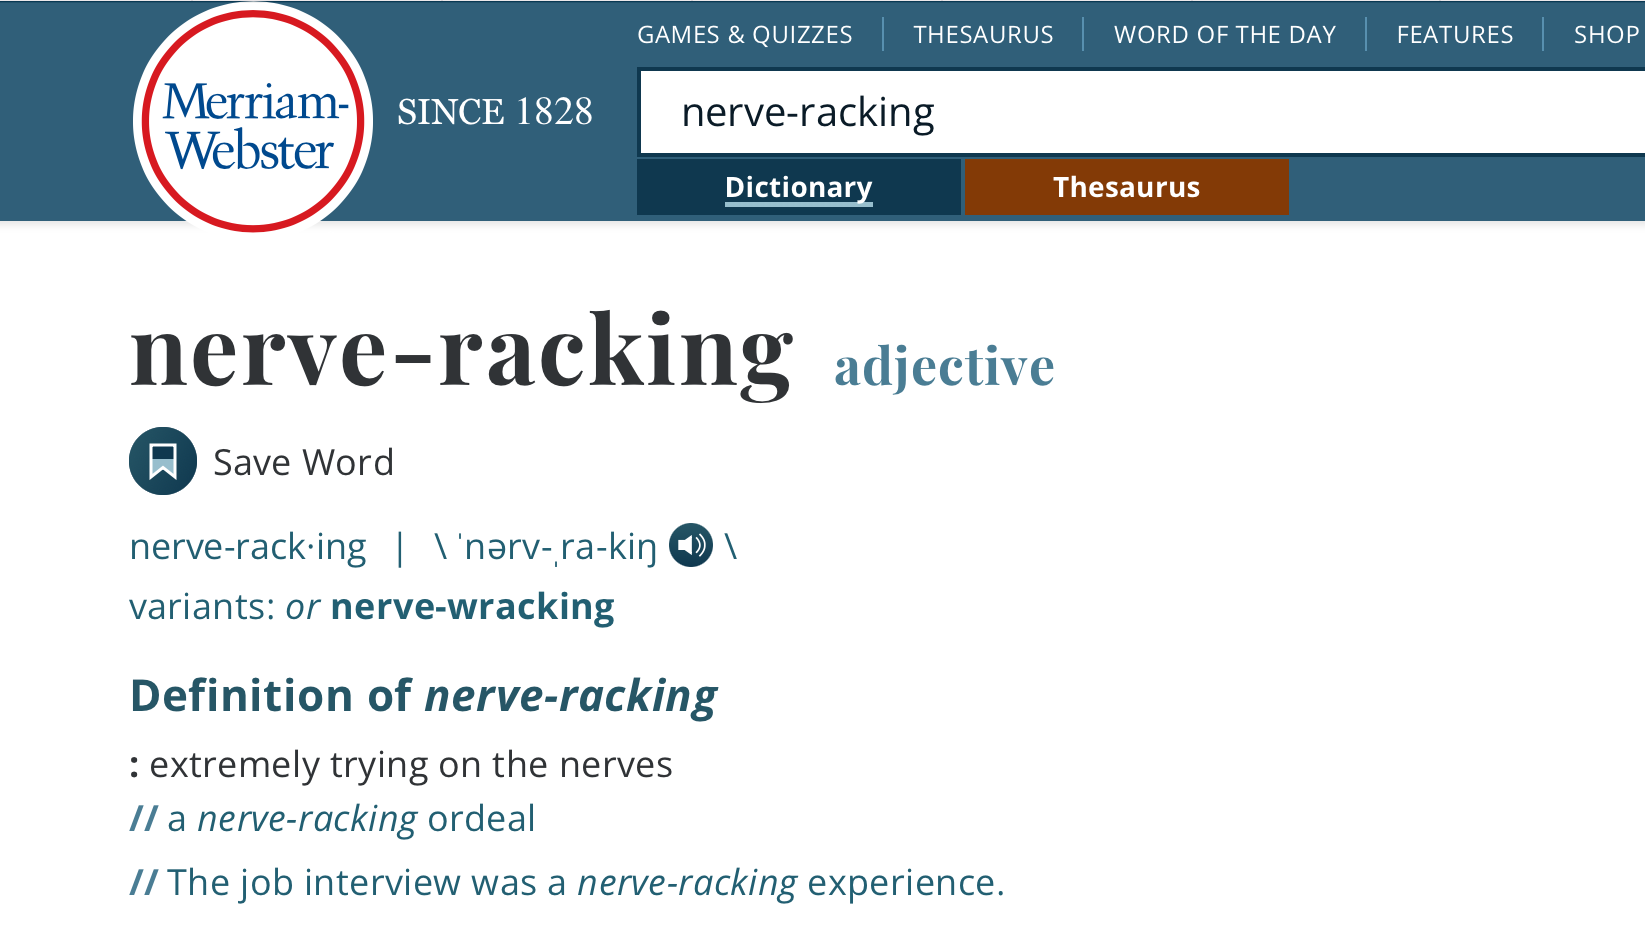 Screen Shot of Merriam Webster's definition of Nerve Racking, which states that "racking" is the correct spelling while "wracking" is an acceptable variant